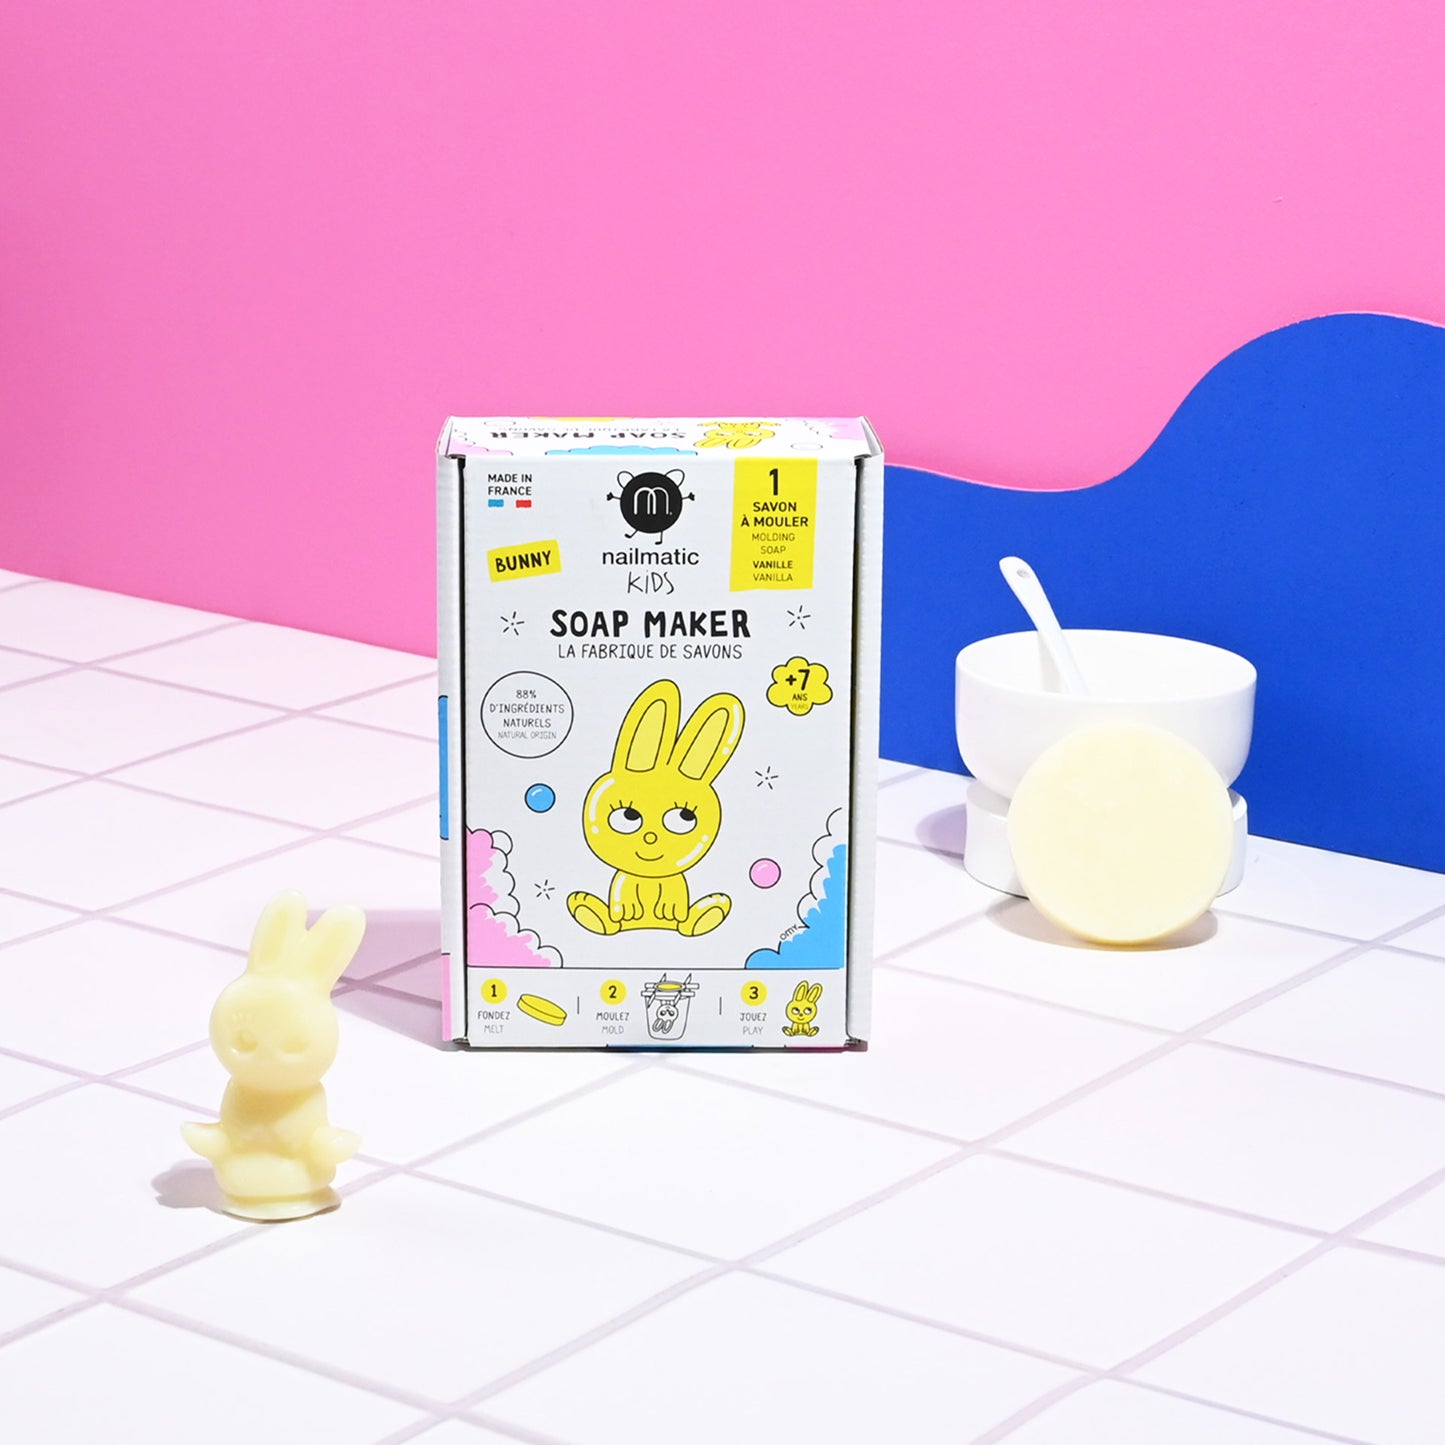 Diy kit soap maker bunny with yellow soap